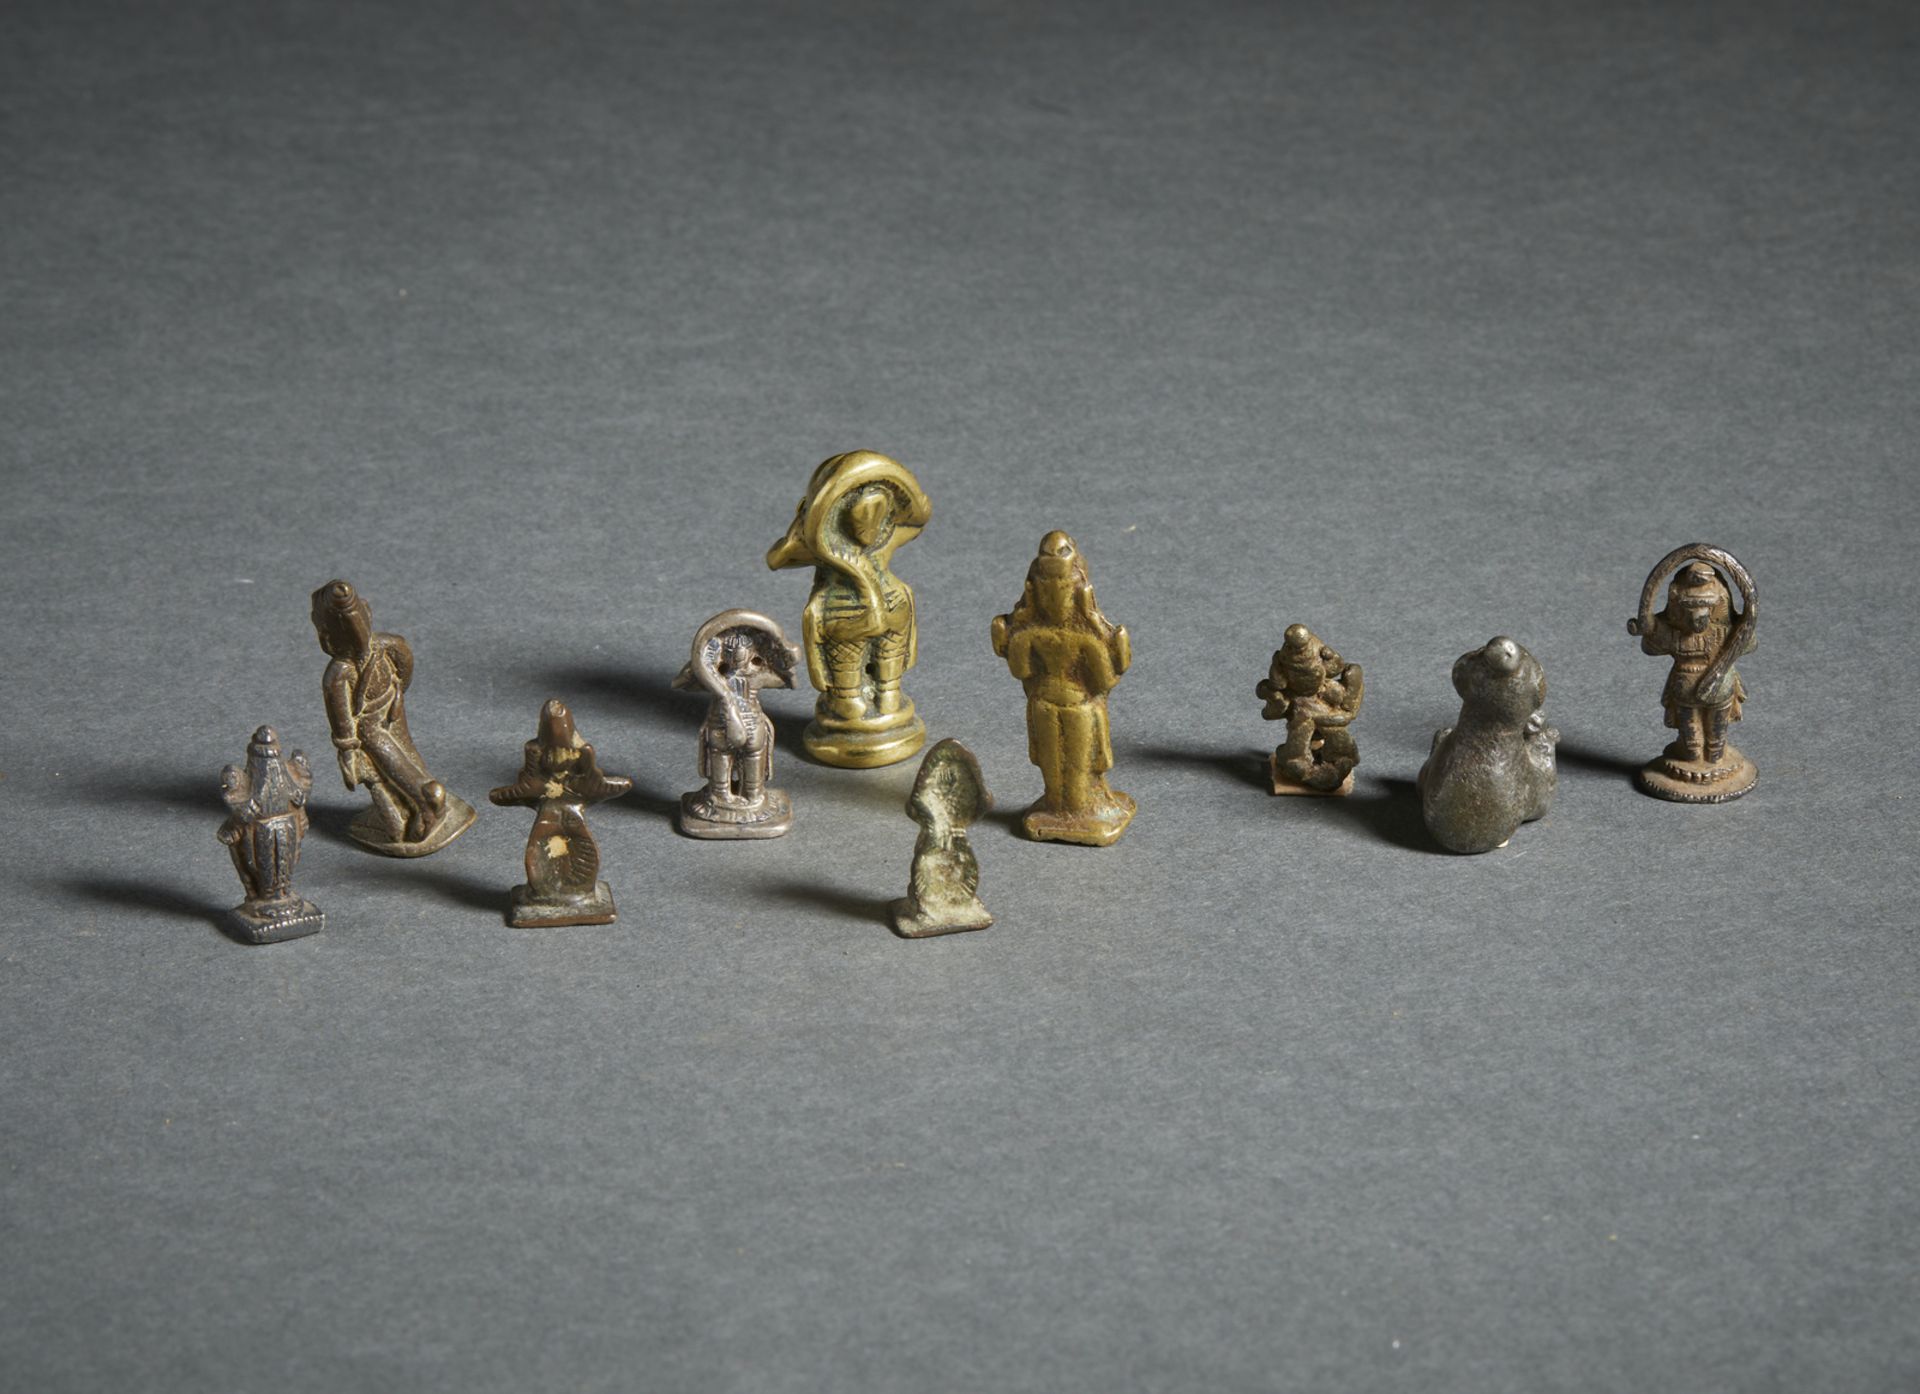 A group of 10 miniature devotional bronze figures India, 19th century The size shown refers to the - Image 2 of 2